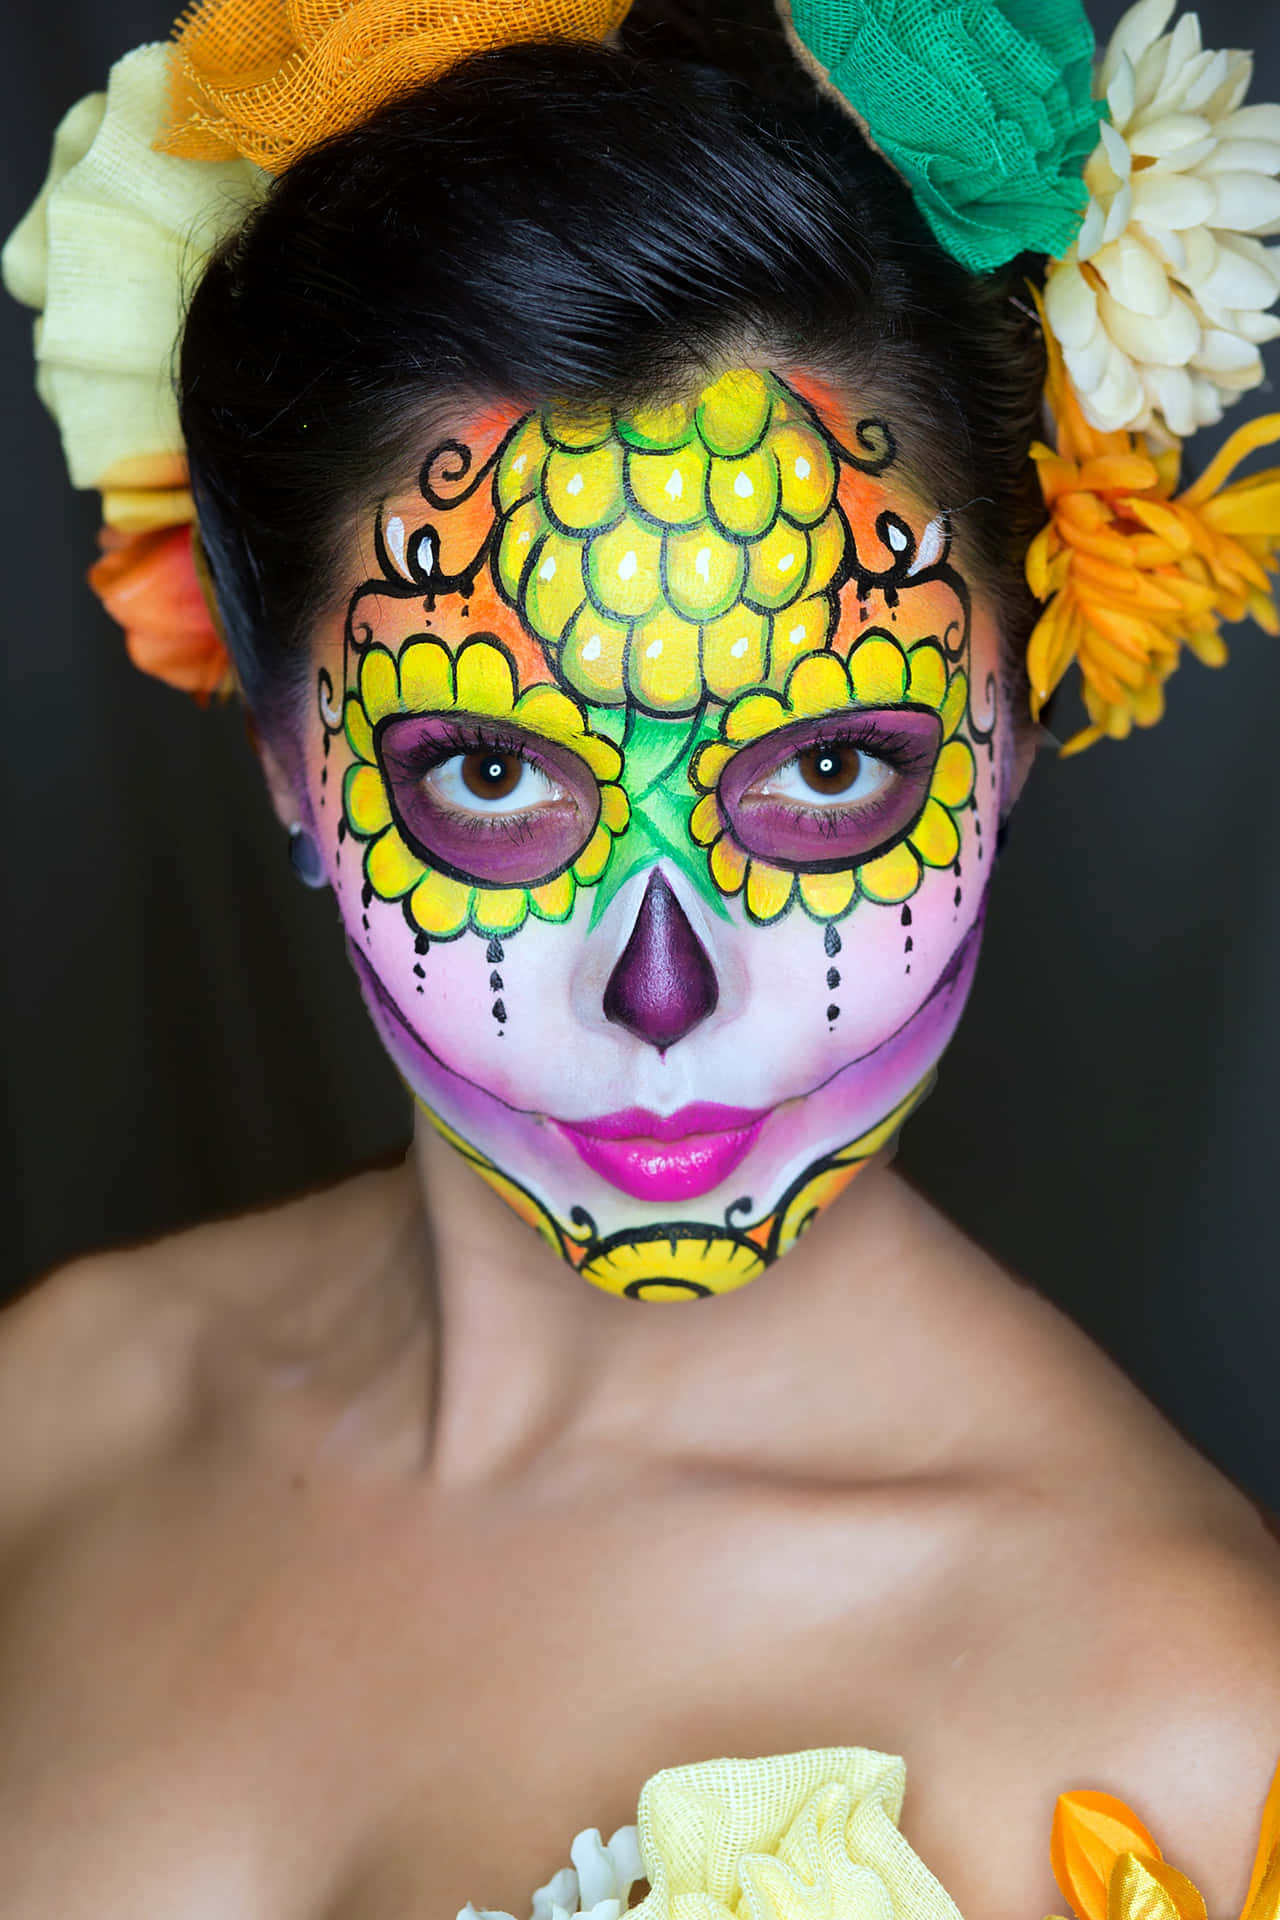 Hispanicdead Makeup Could Be Translated To 